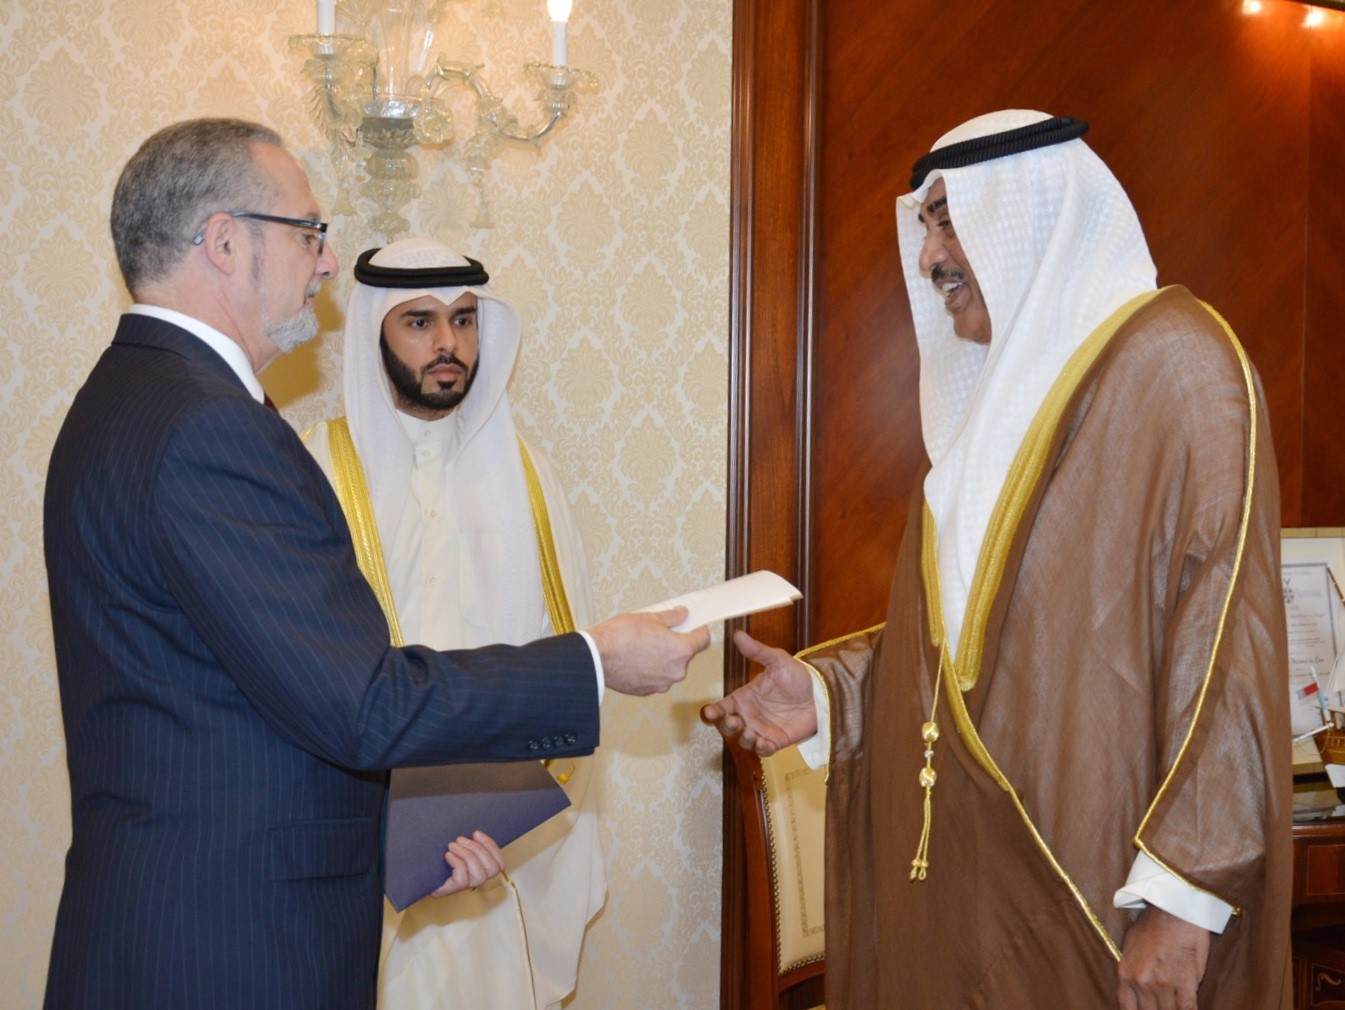 Acting Prime Minister and Foreign Minister Sheikh Sabah Khaled Al-Hamad Al-Sabah receives the credentials of the newly-appointed ambassador of the United States to Kuwait Lawrence Silverman